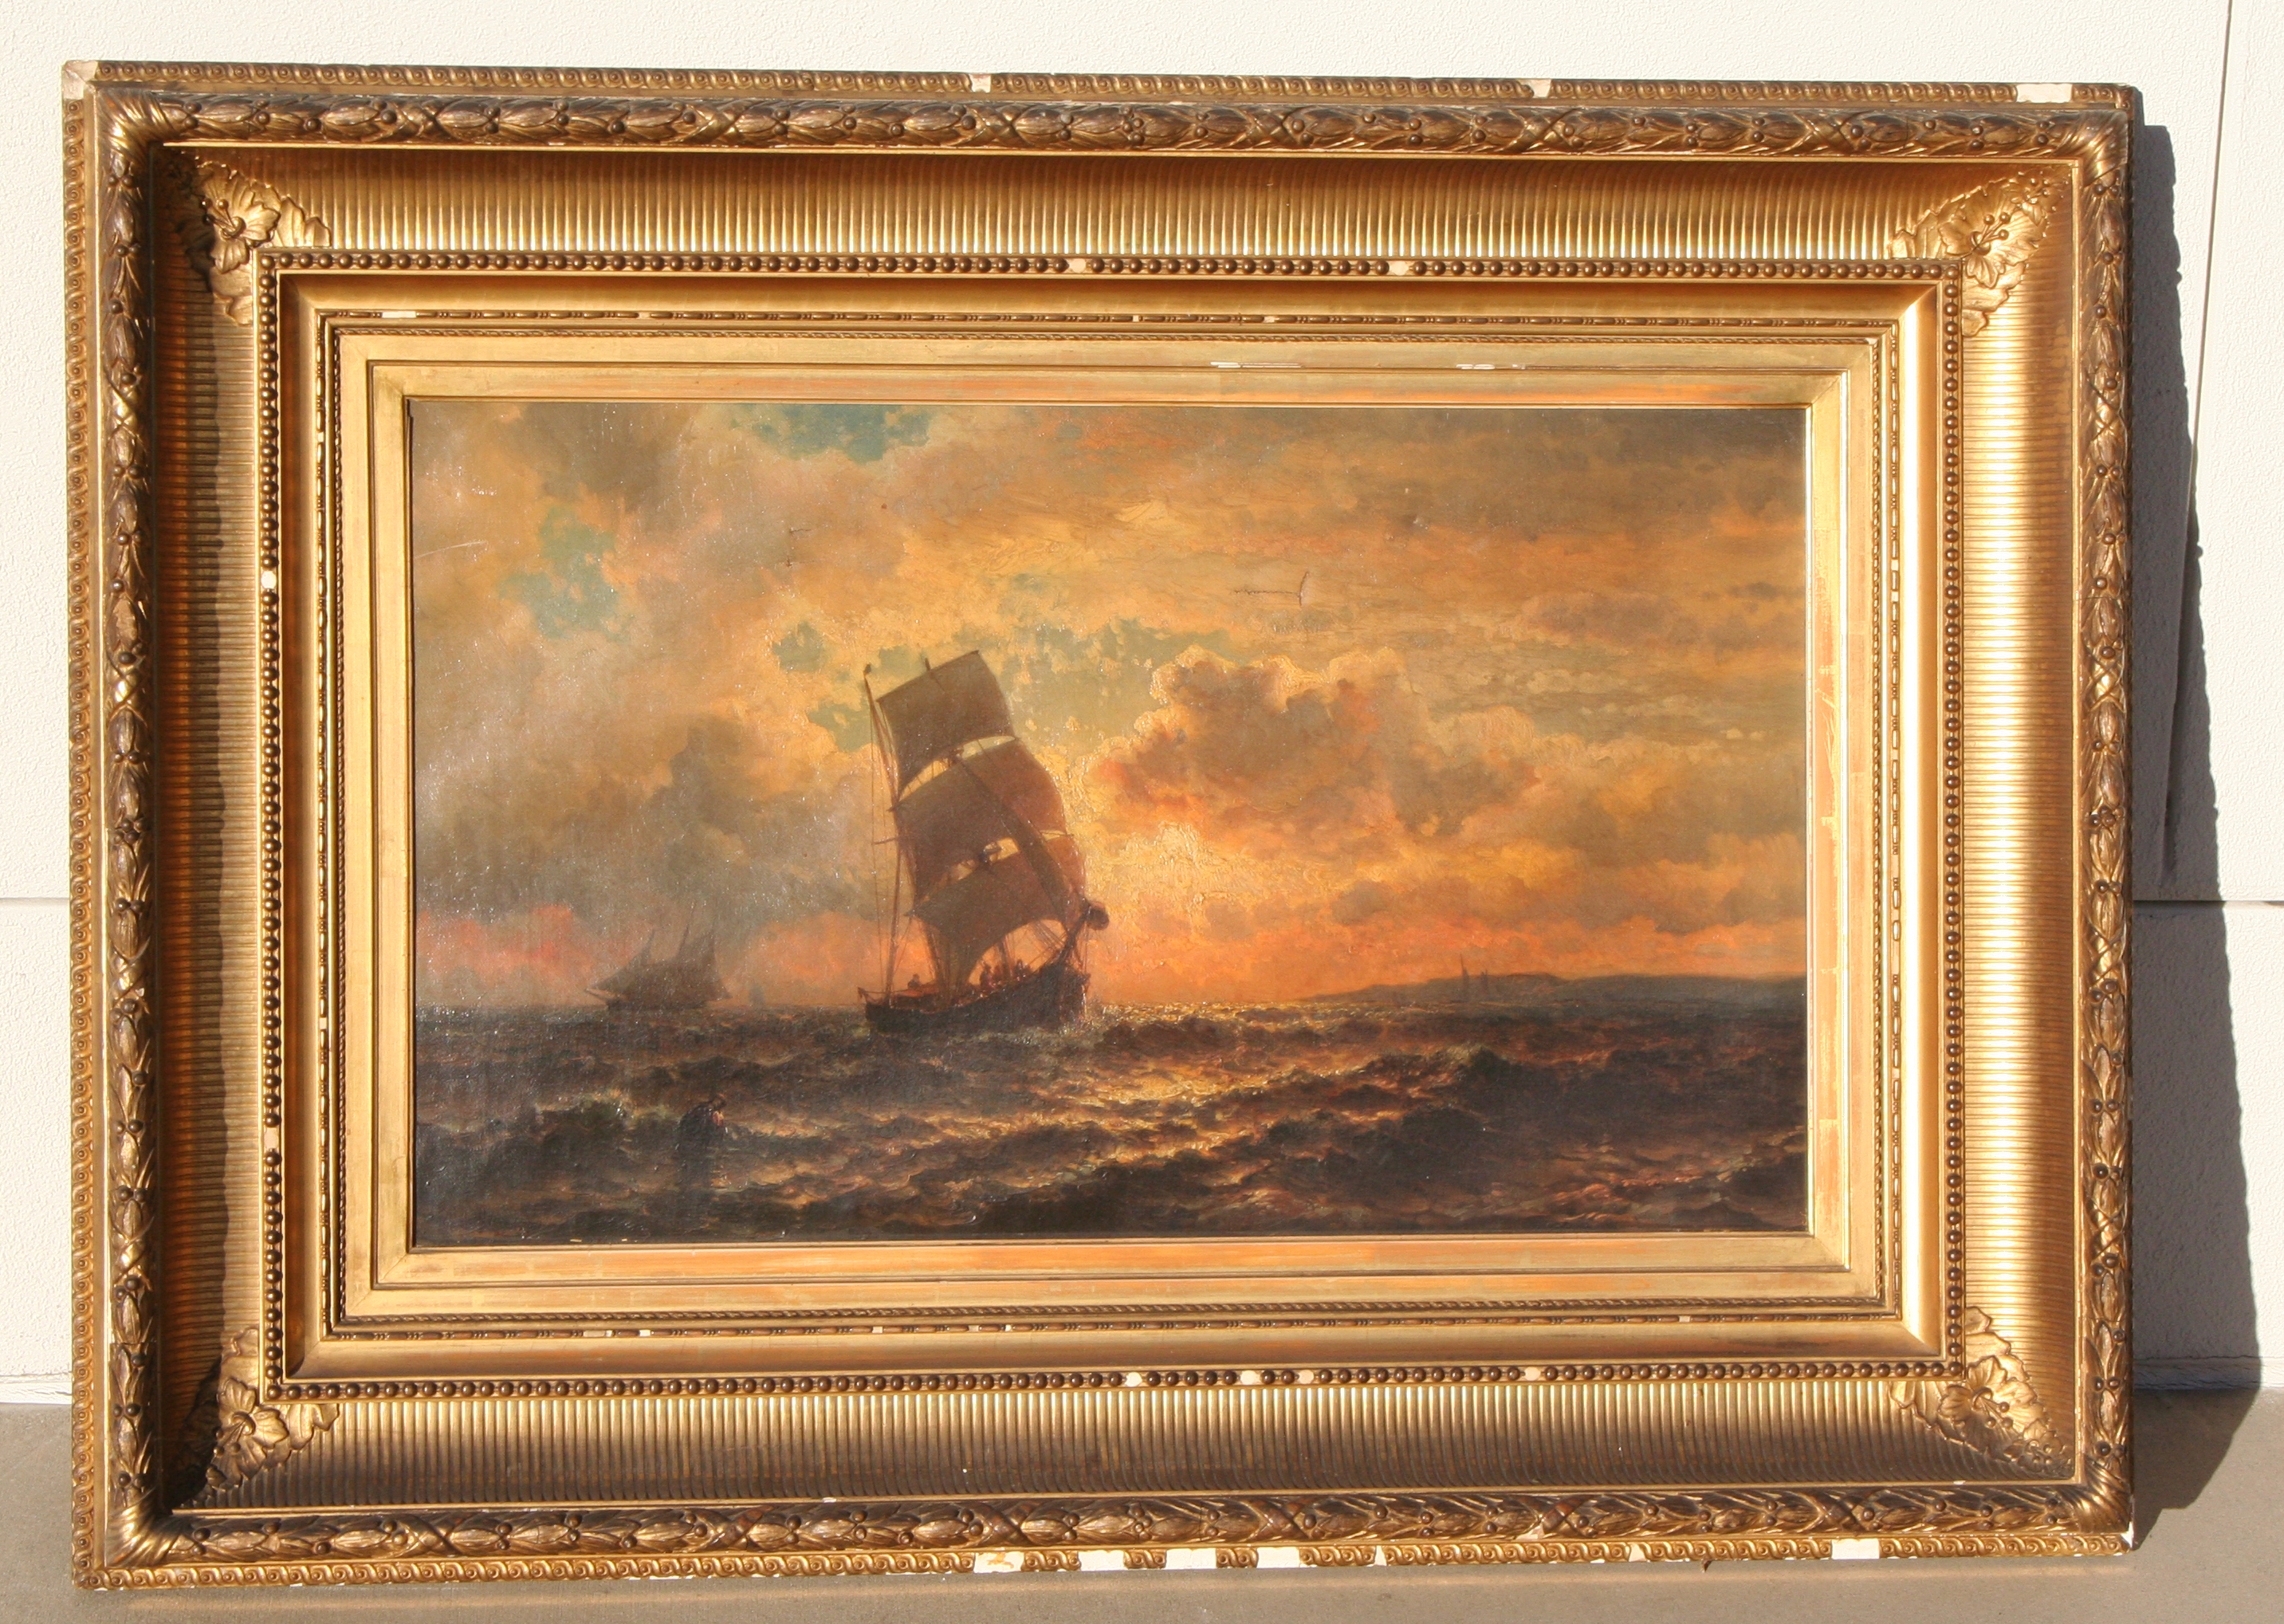 Painting of Ship my father says won a british exhibition in 1849. he is probably wrong about the date.